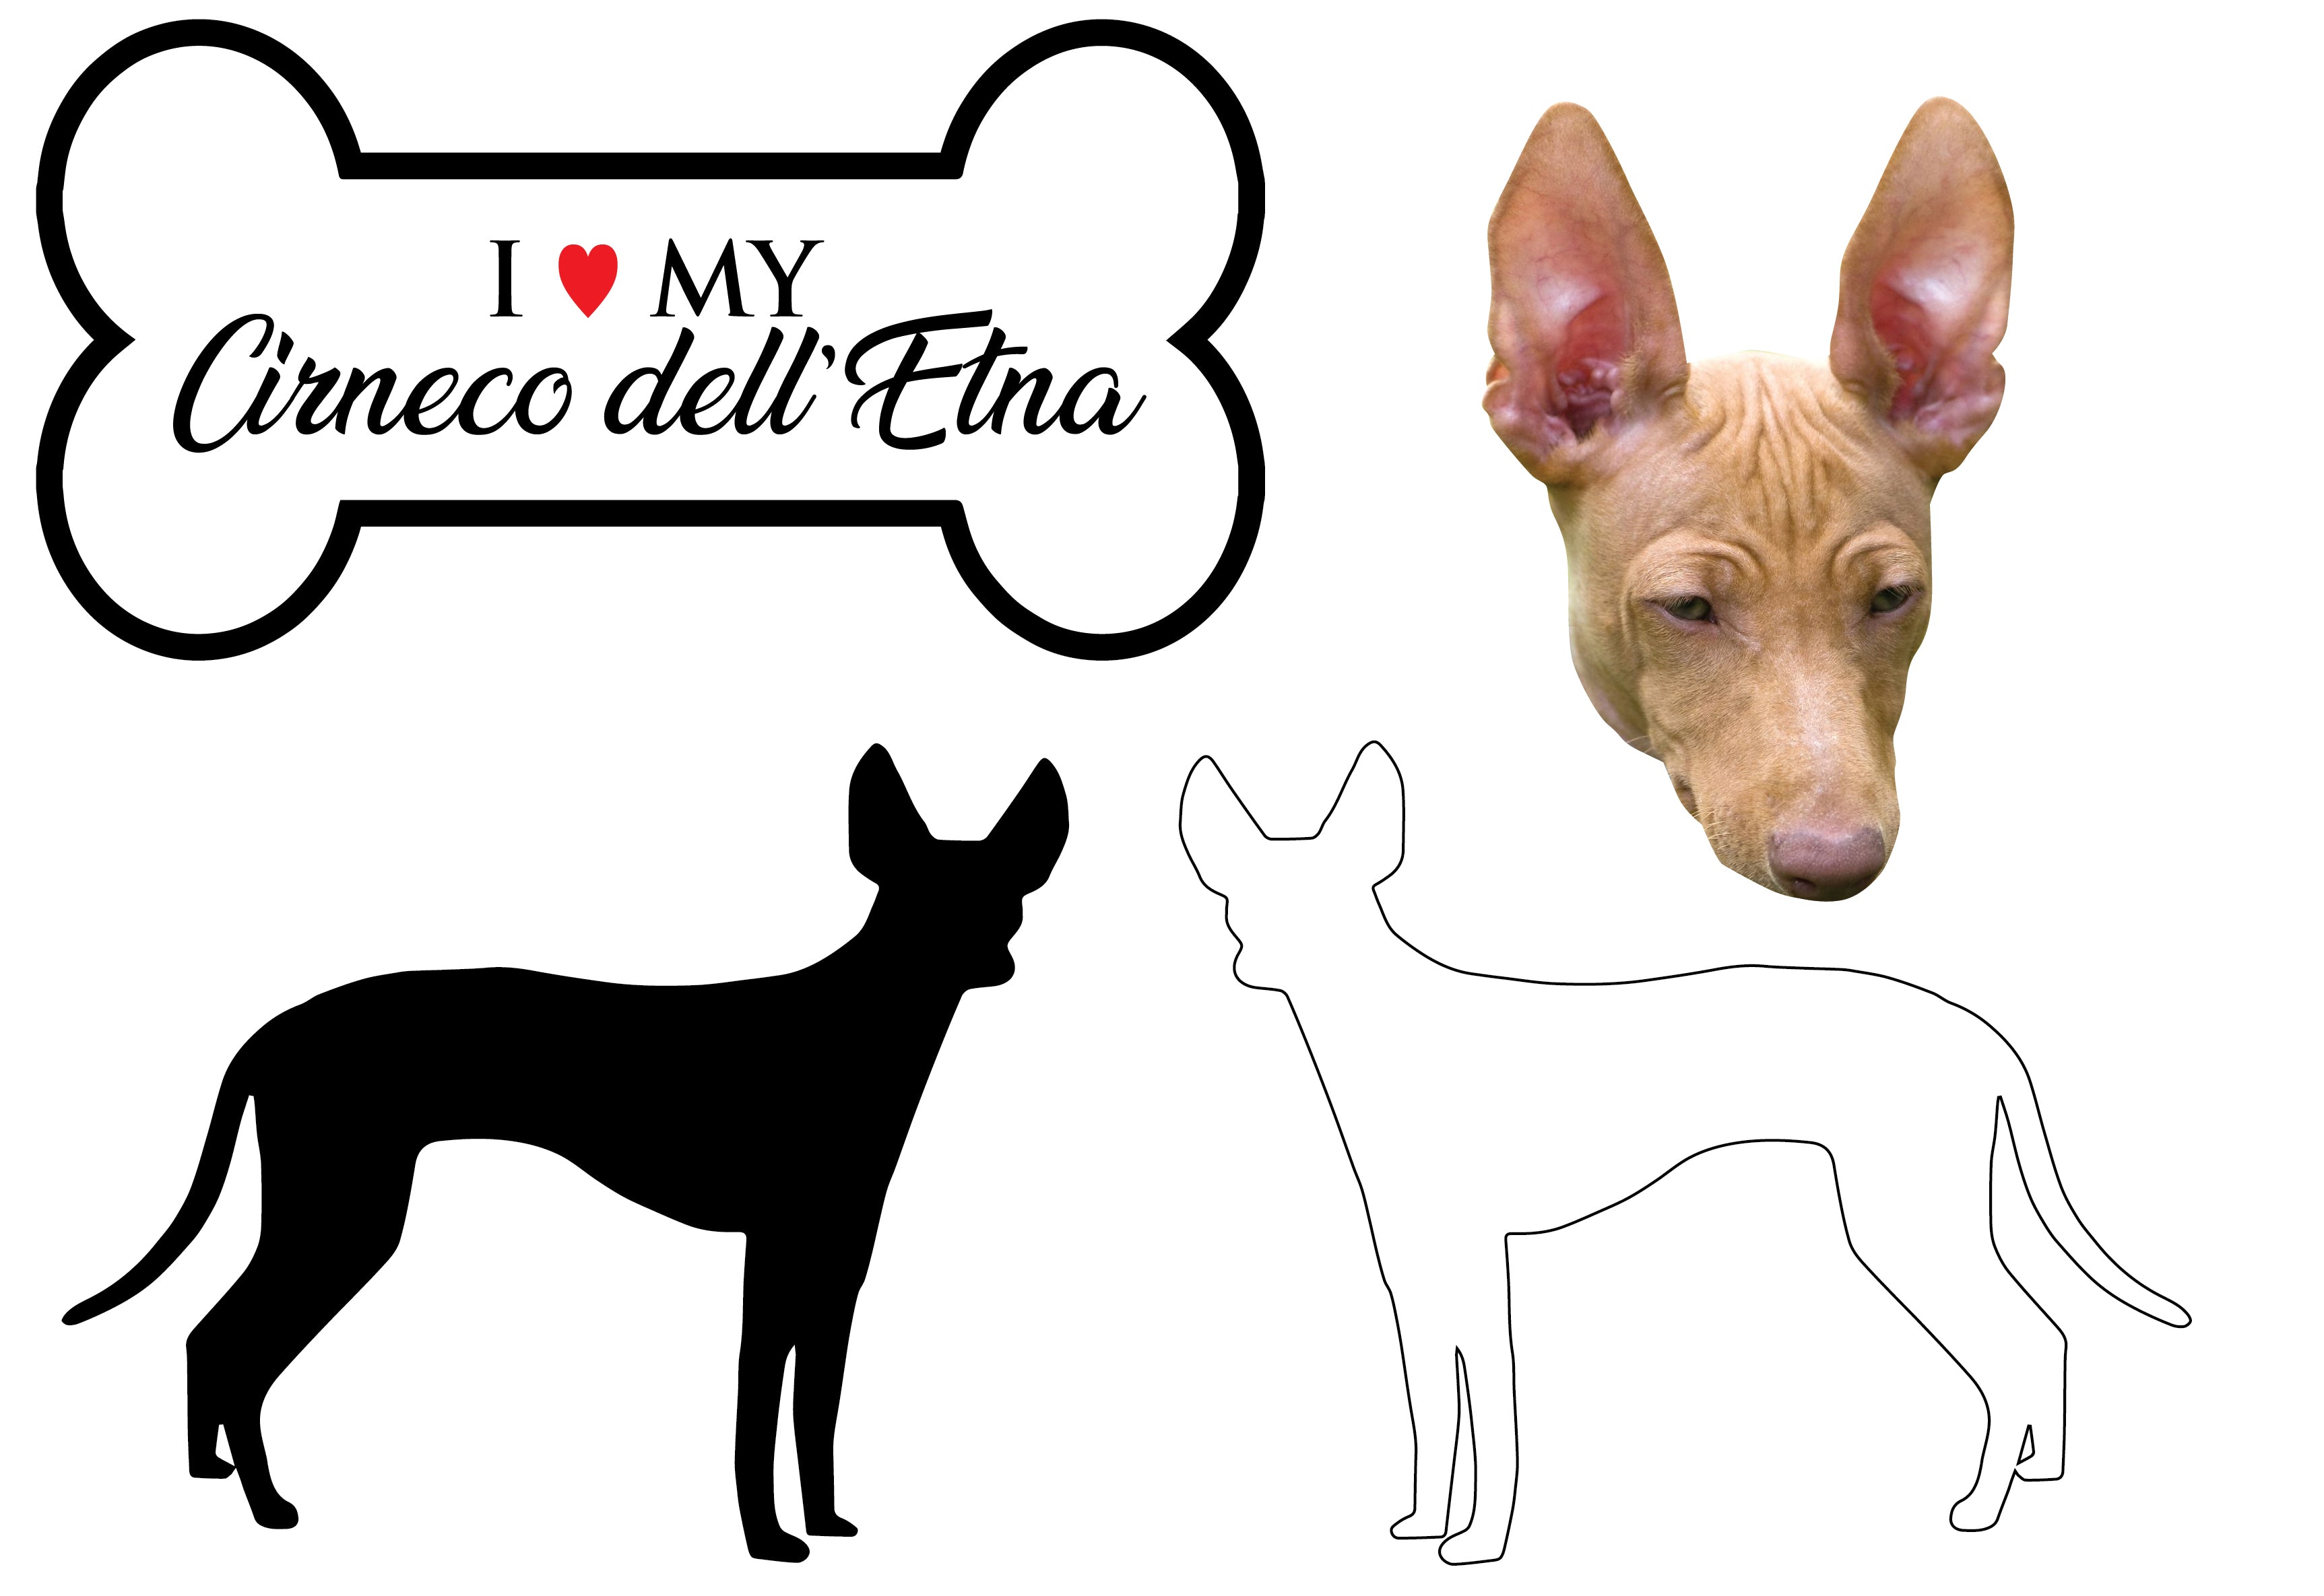 Cirneco dell’Etna - Dog Breed Decals (Set of 16) - Sizes in Description